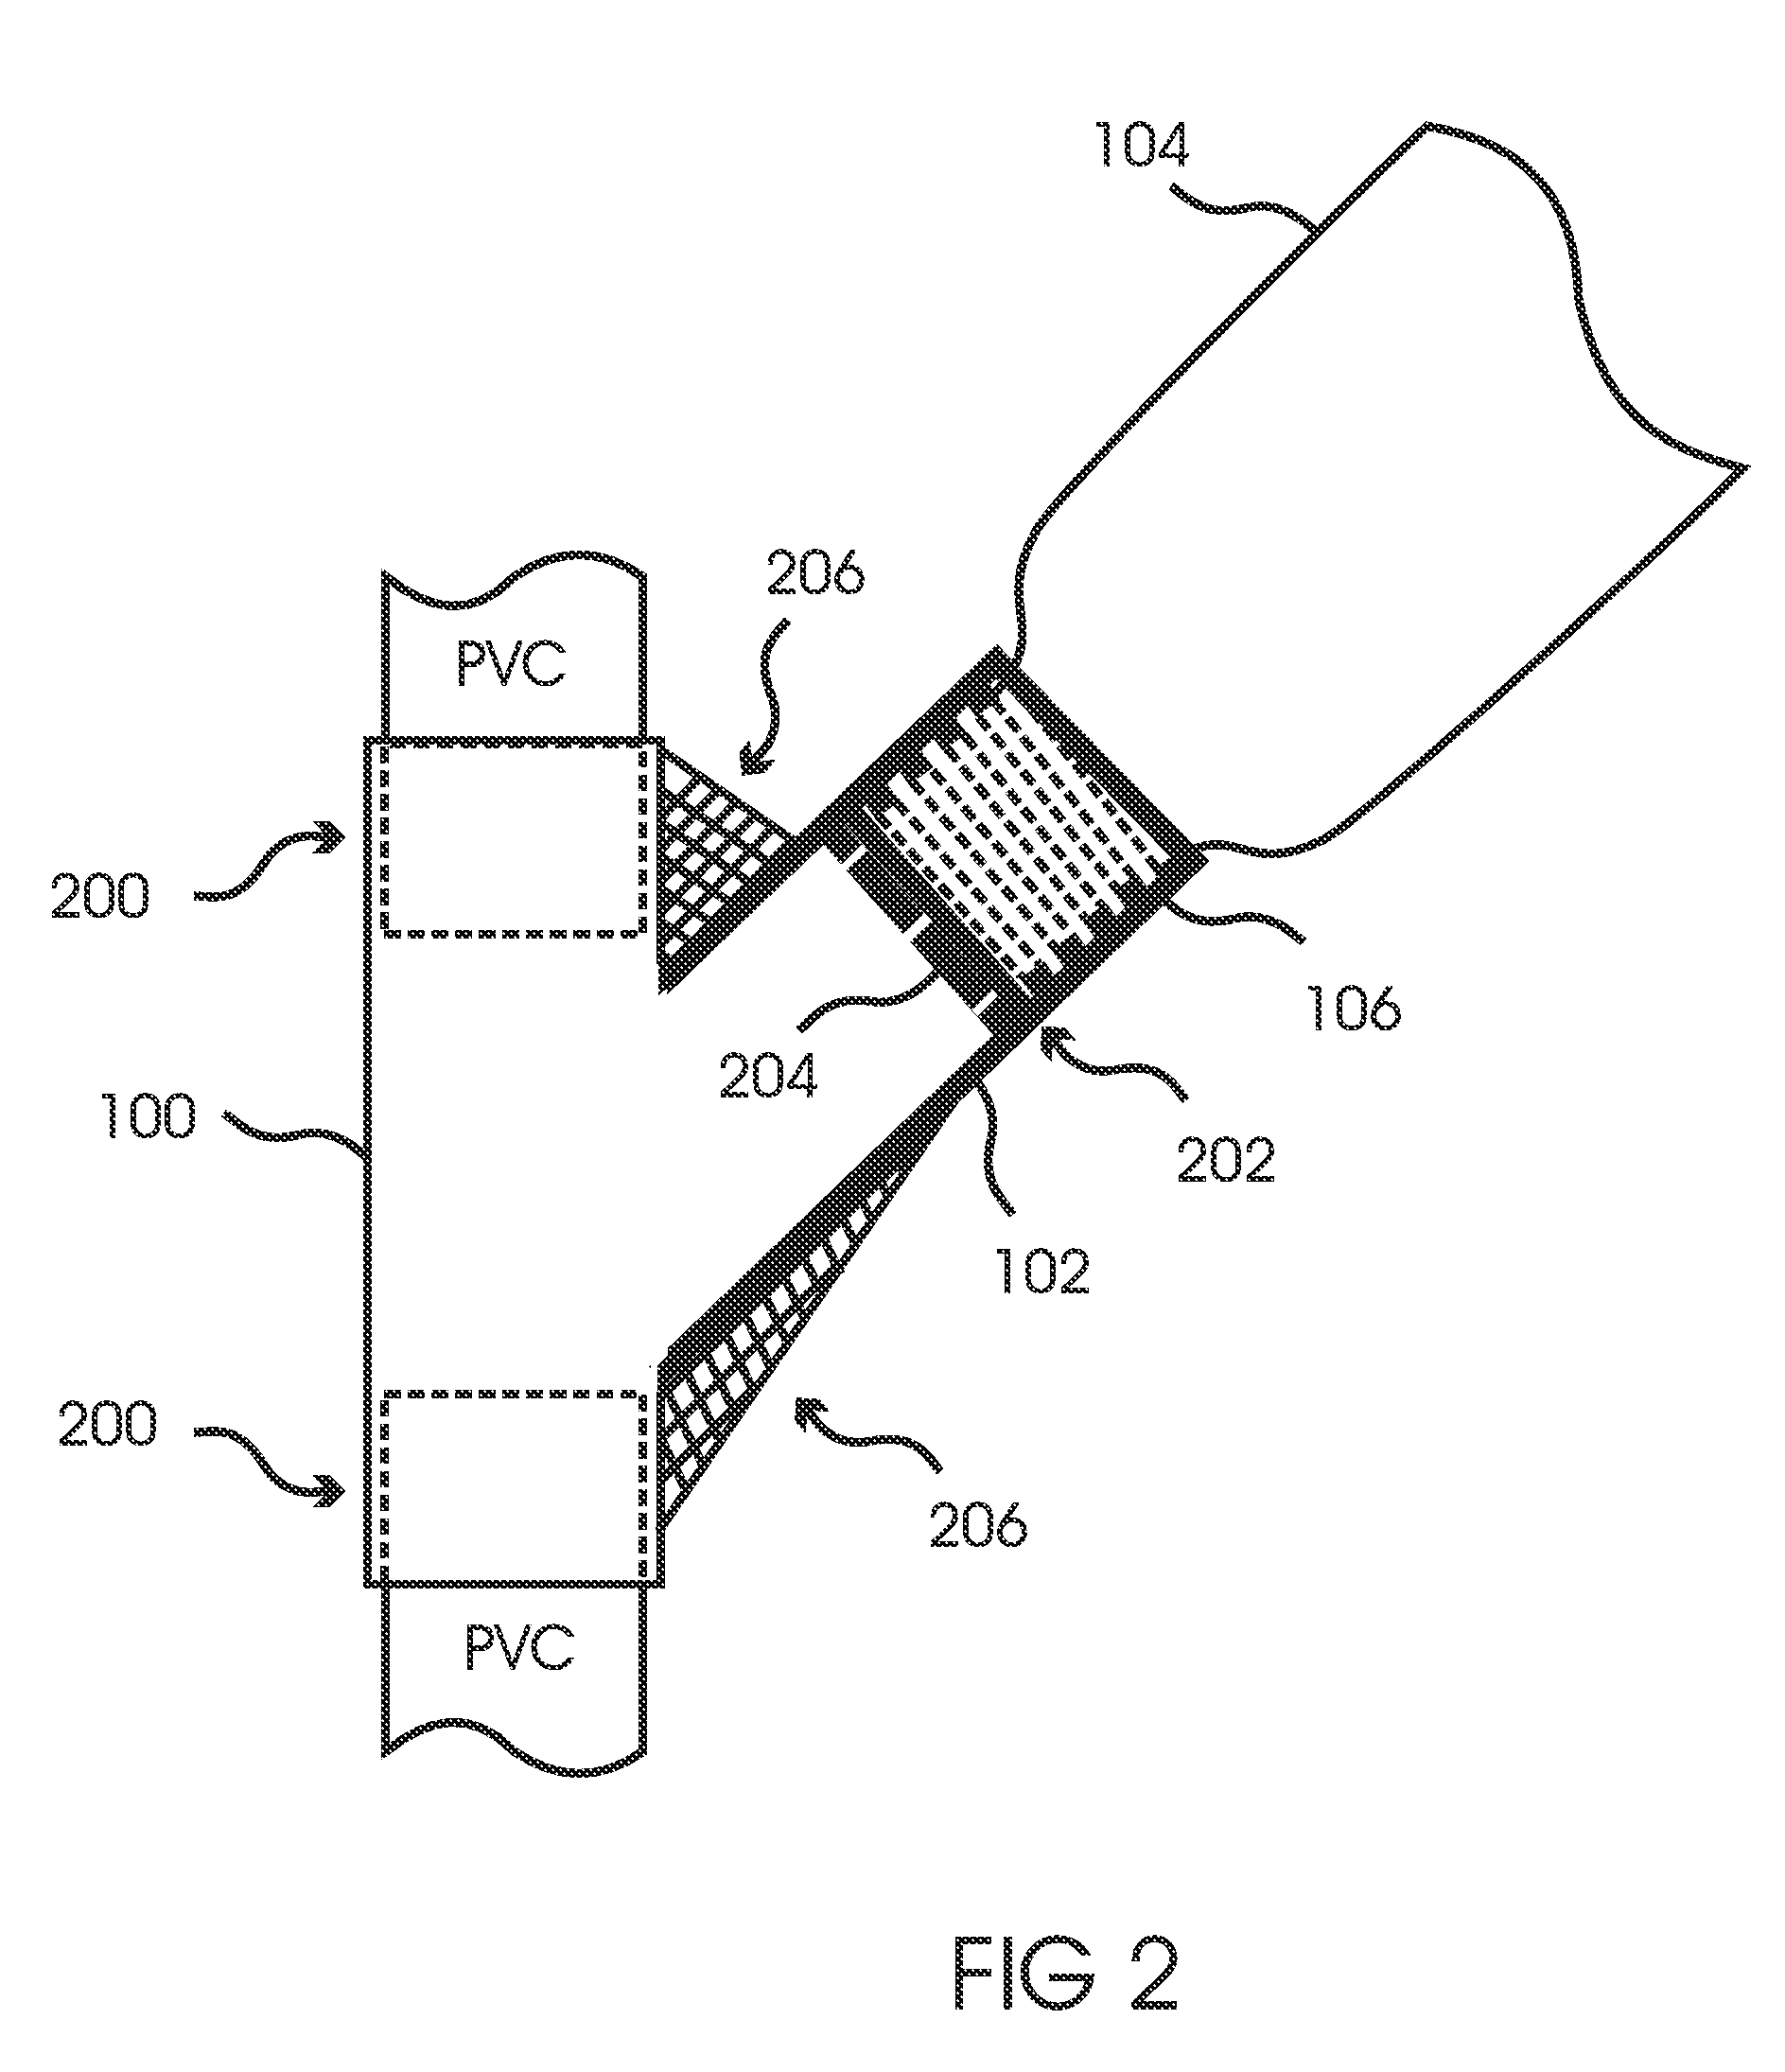 Liquid Fertilizer, Weed Killer, and Pesticide Application Device Using Exchangeable Containers Connected to an Irrigation System